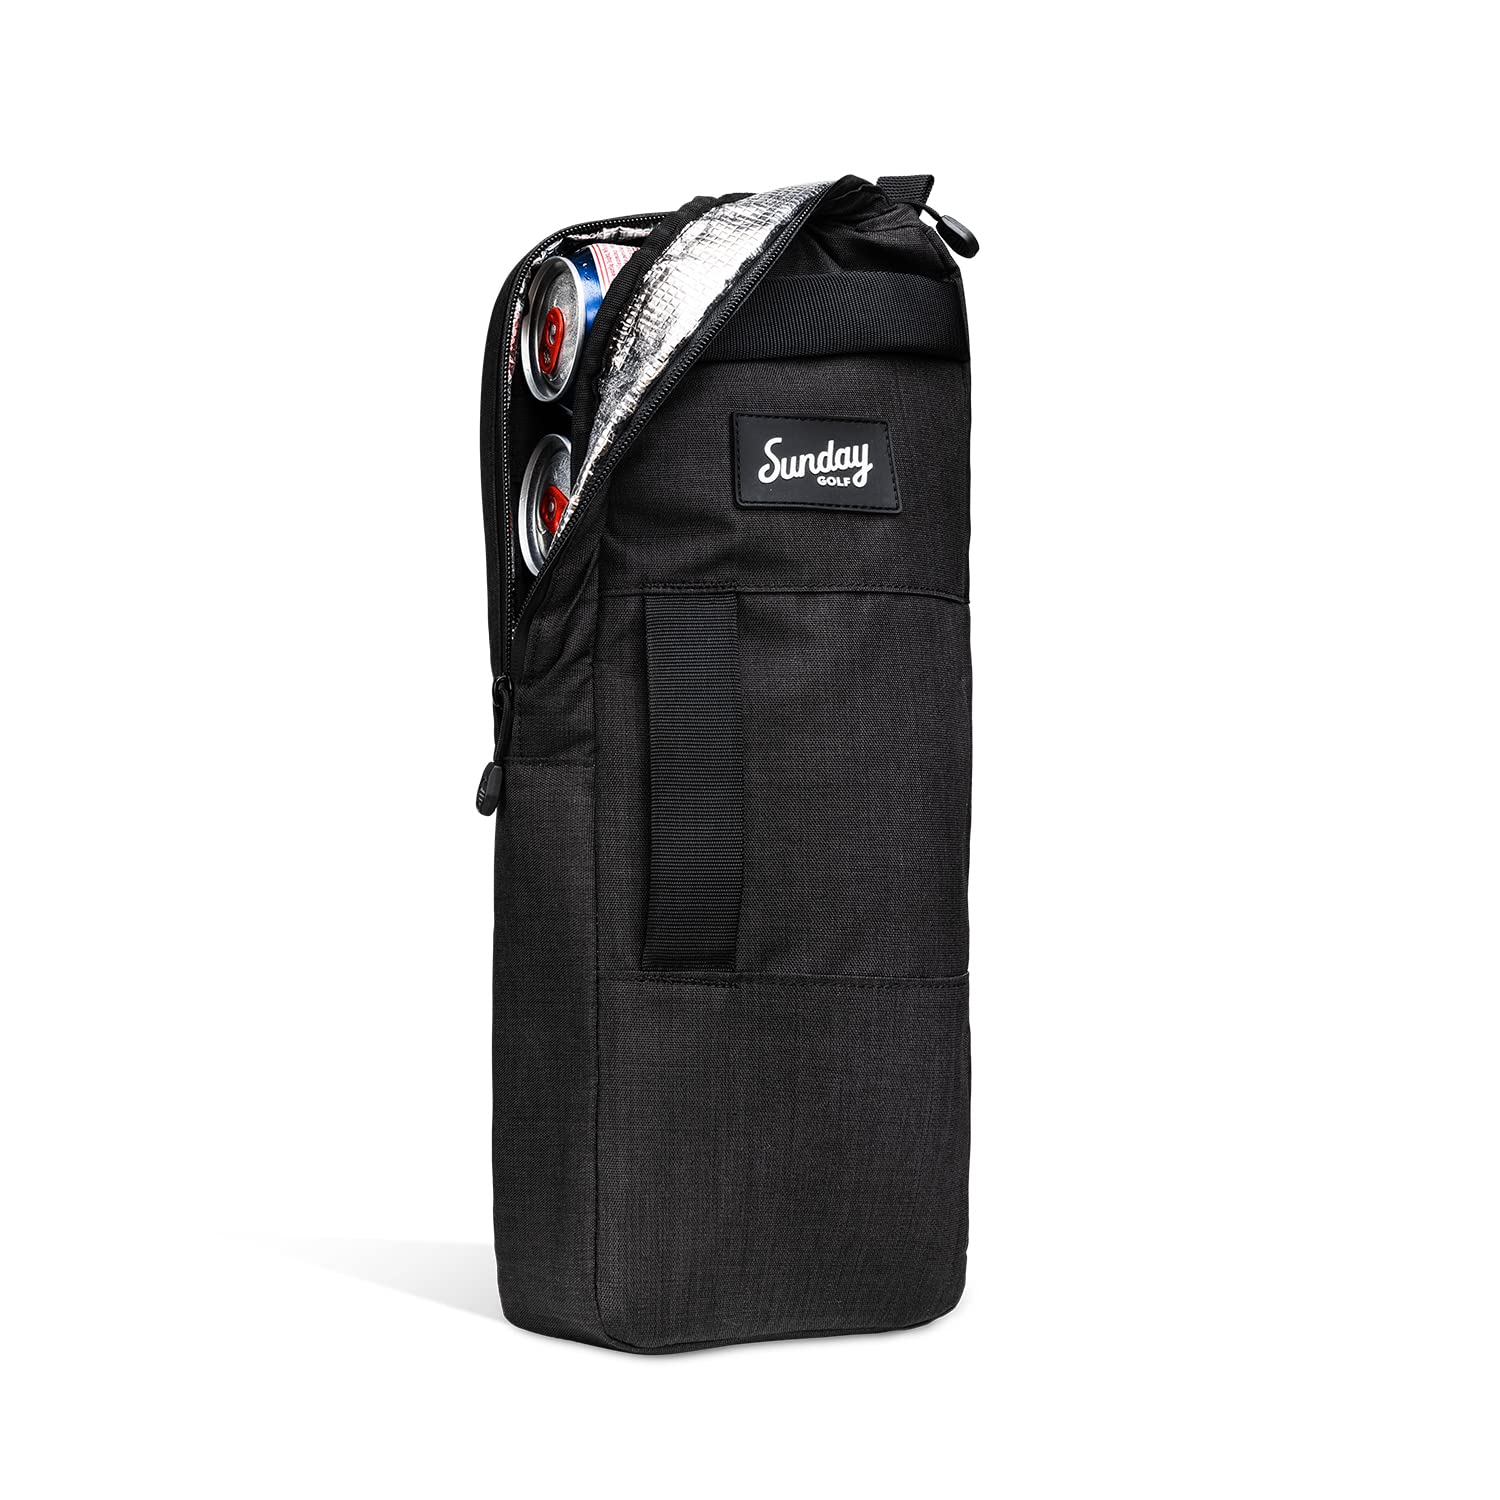 Golf Cooler Bag, Capacity for 7 Cans, Discrete, Water Resistant Zippers, Sleeves for Ice Packs, with 3 Grab Handles by Sunday Golf